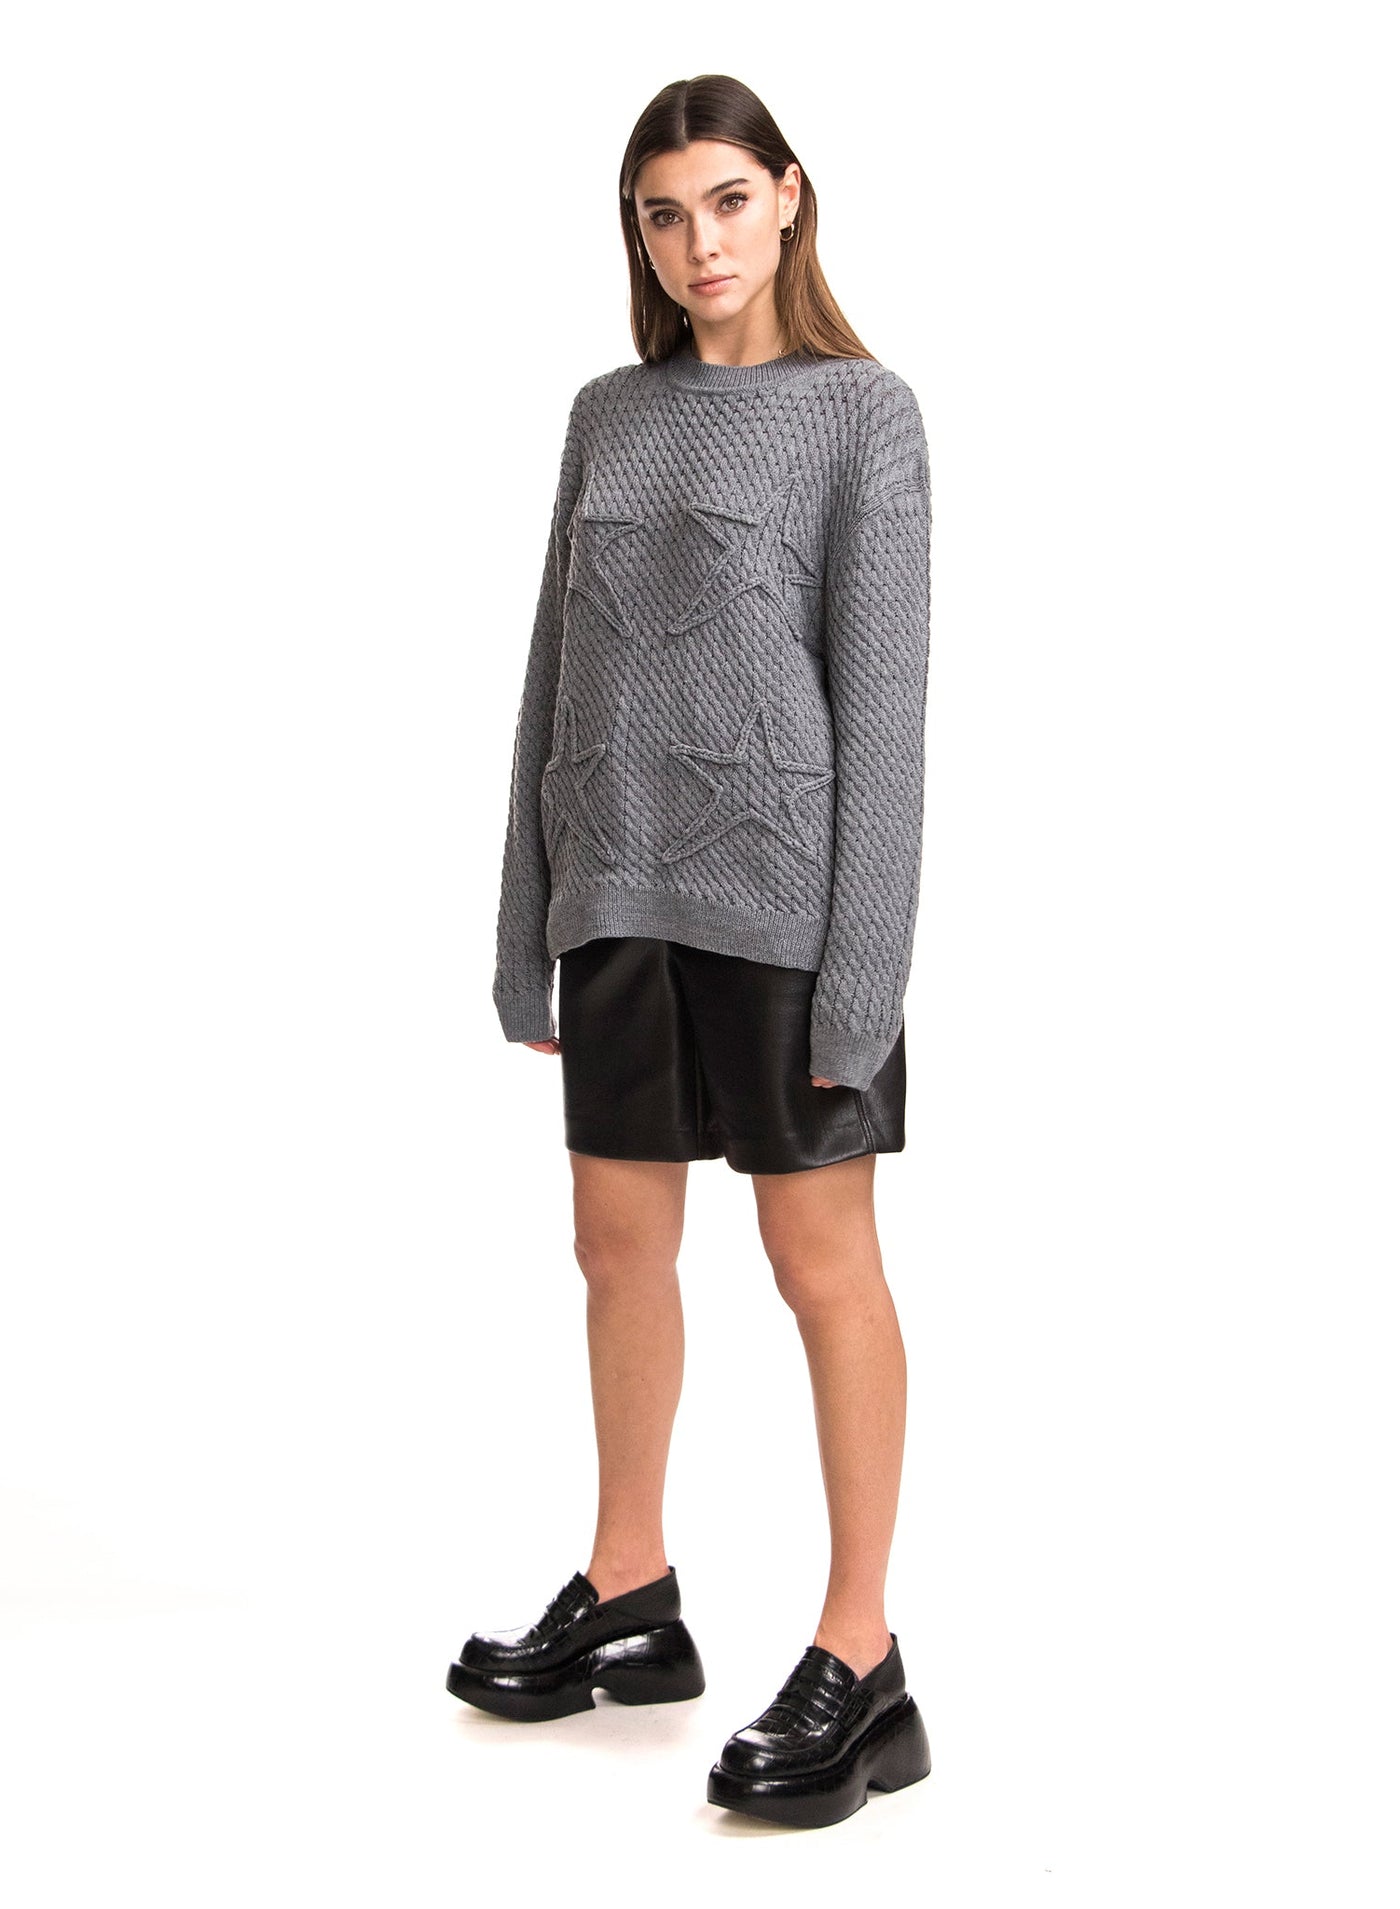 CABLE STARS - Oversized Cable Sweater